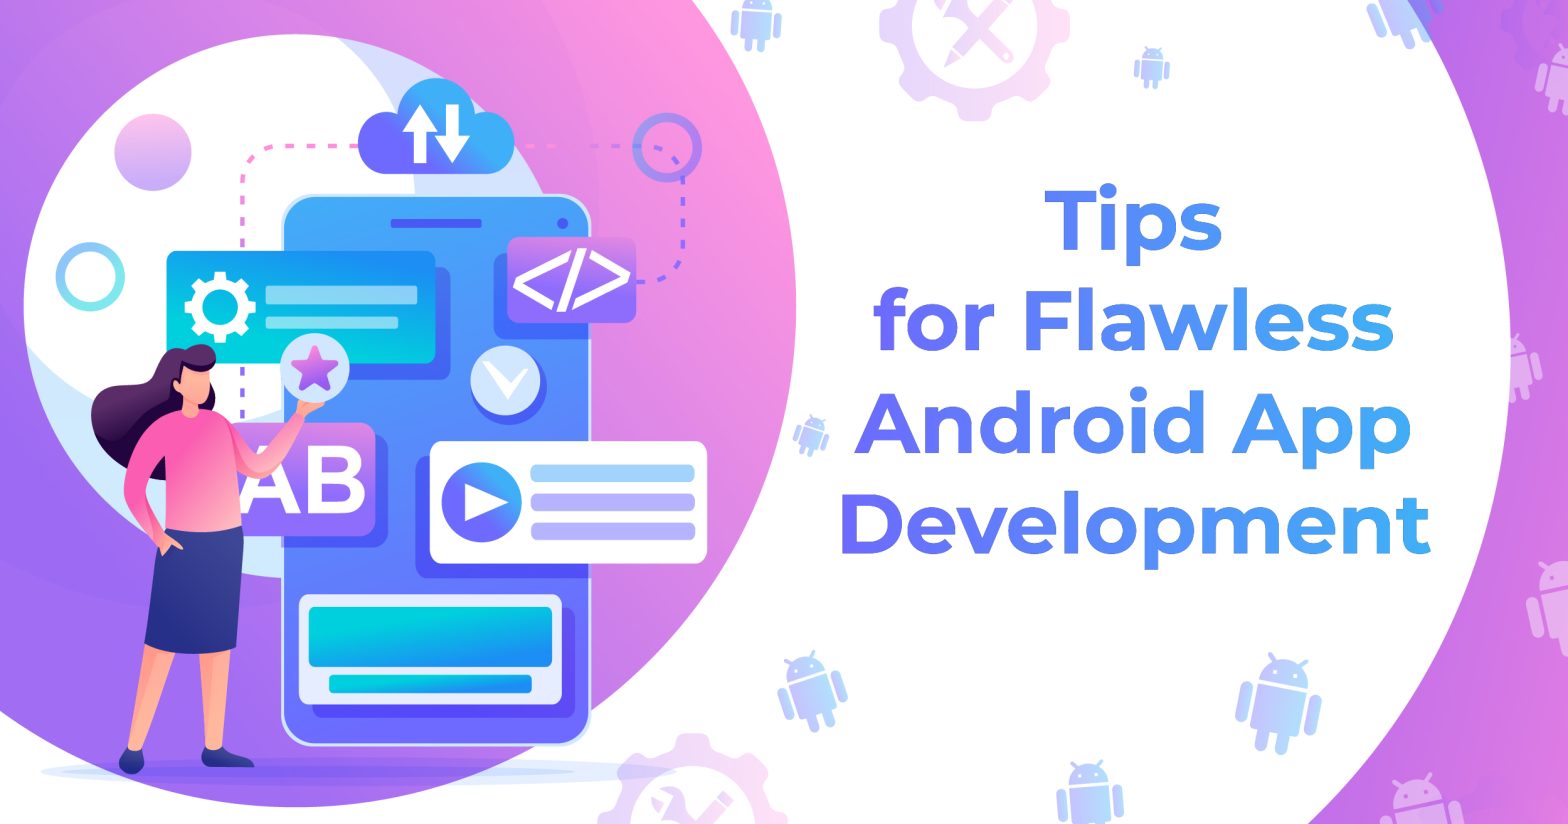 Tips For Flawless Android App Development